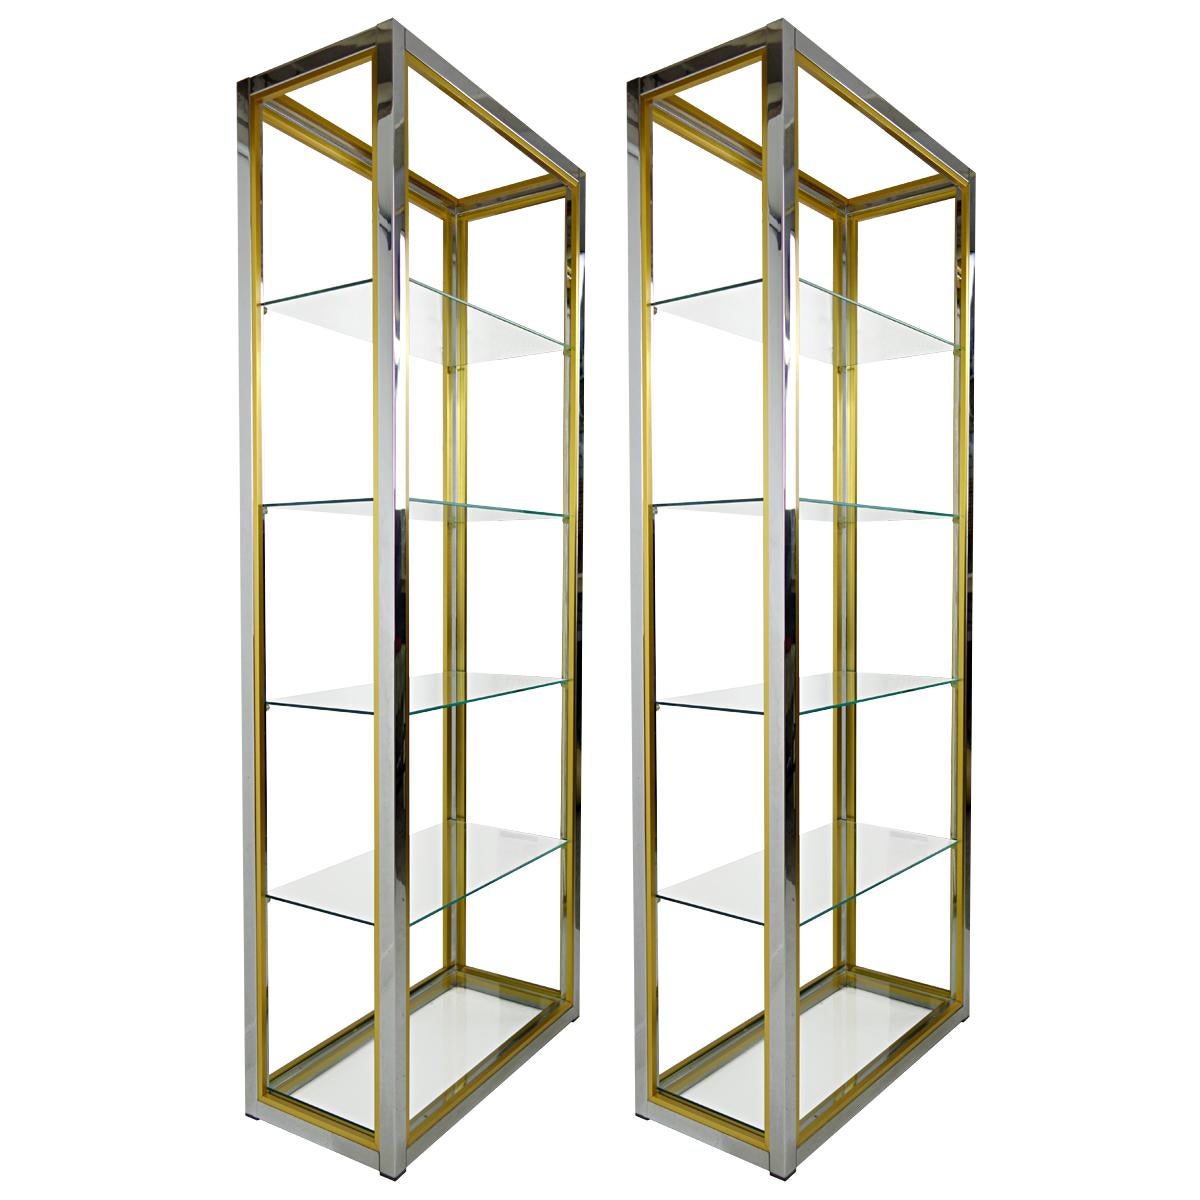 Set of two Hollywood Regency étagères in chrome, brass and glass created by Renato Zevi.
These étagères are a sleek mix of shiny chrome, brass and black smoke glass making for great displays for your beloved collections. Each contains five glass